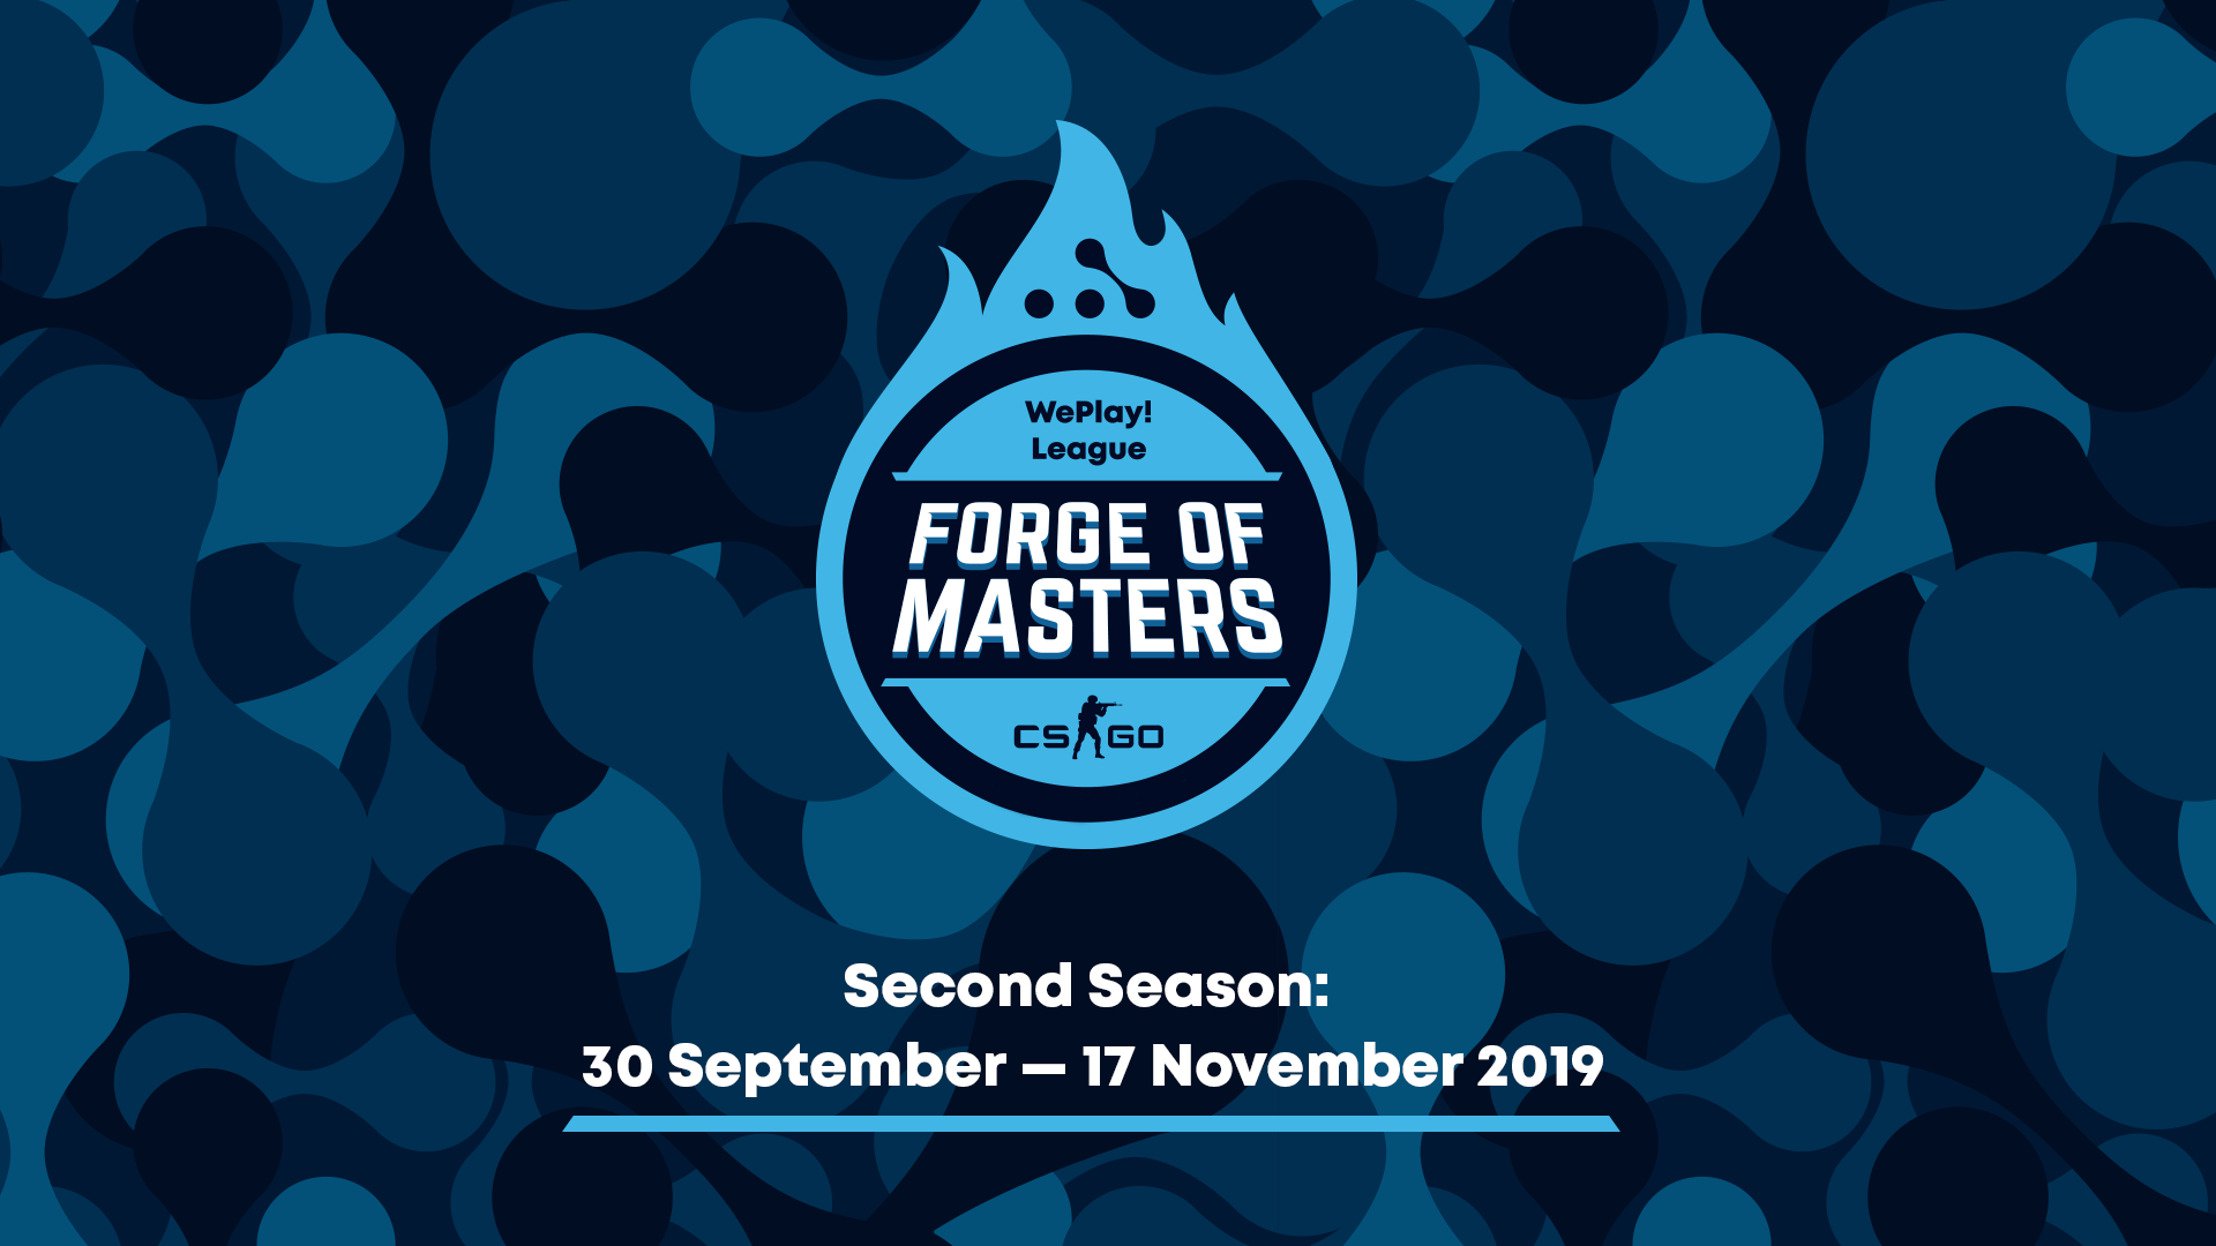 CS:GO Forge of Masters. WePlay! League Season 2 to start this fall